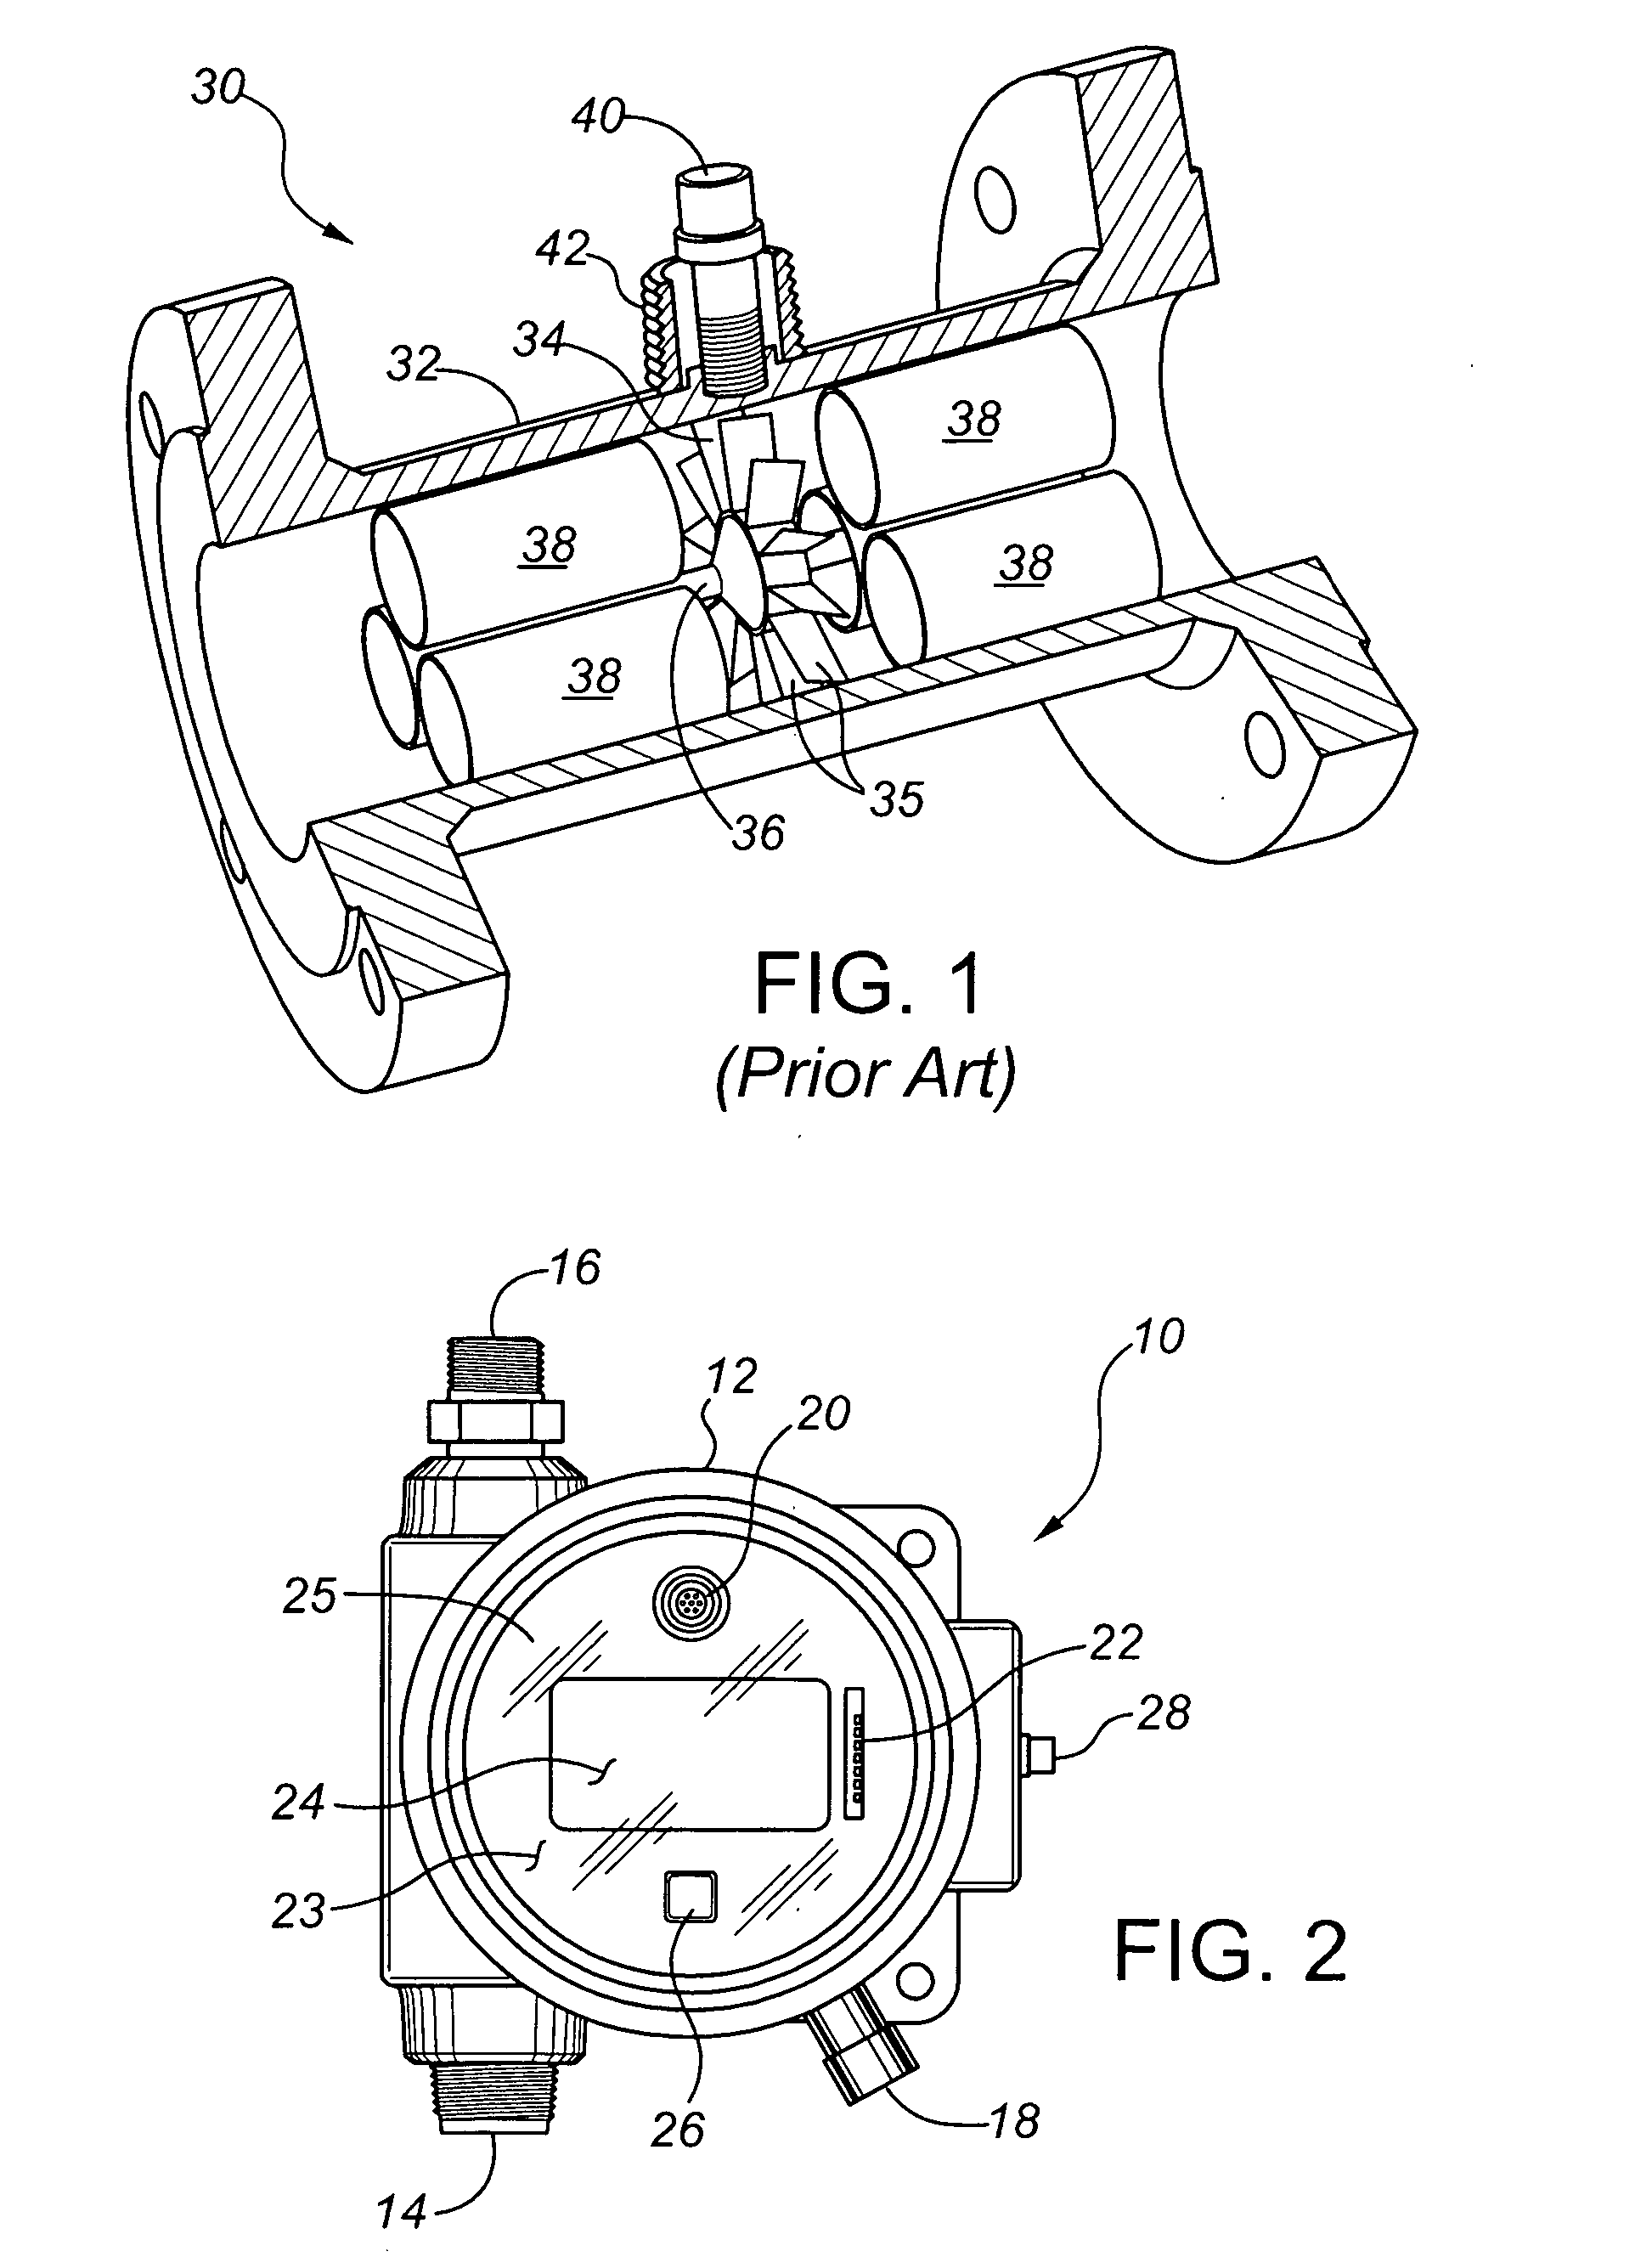 Electronic gas flow measurement and recording device